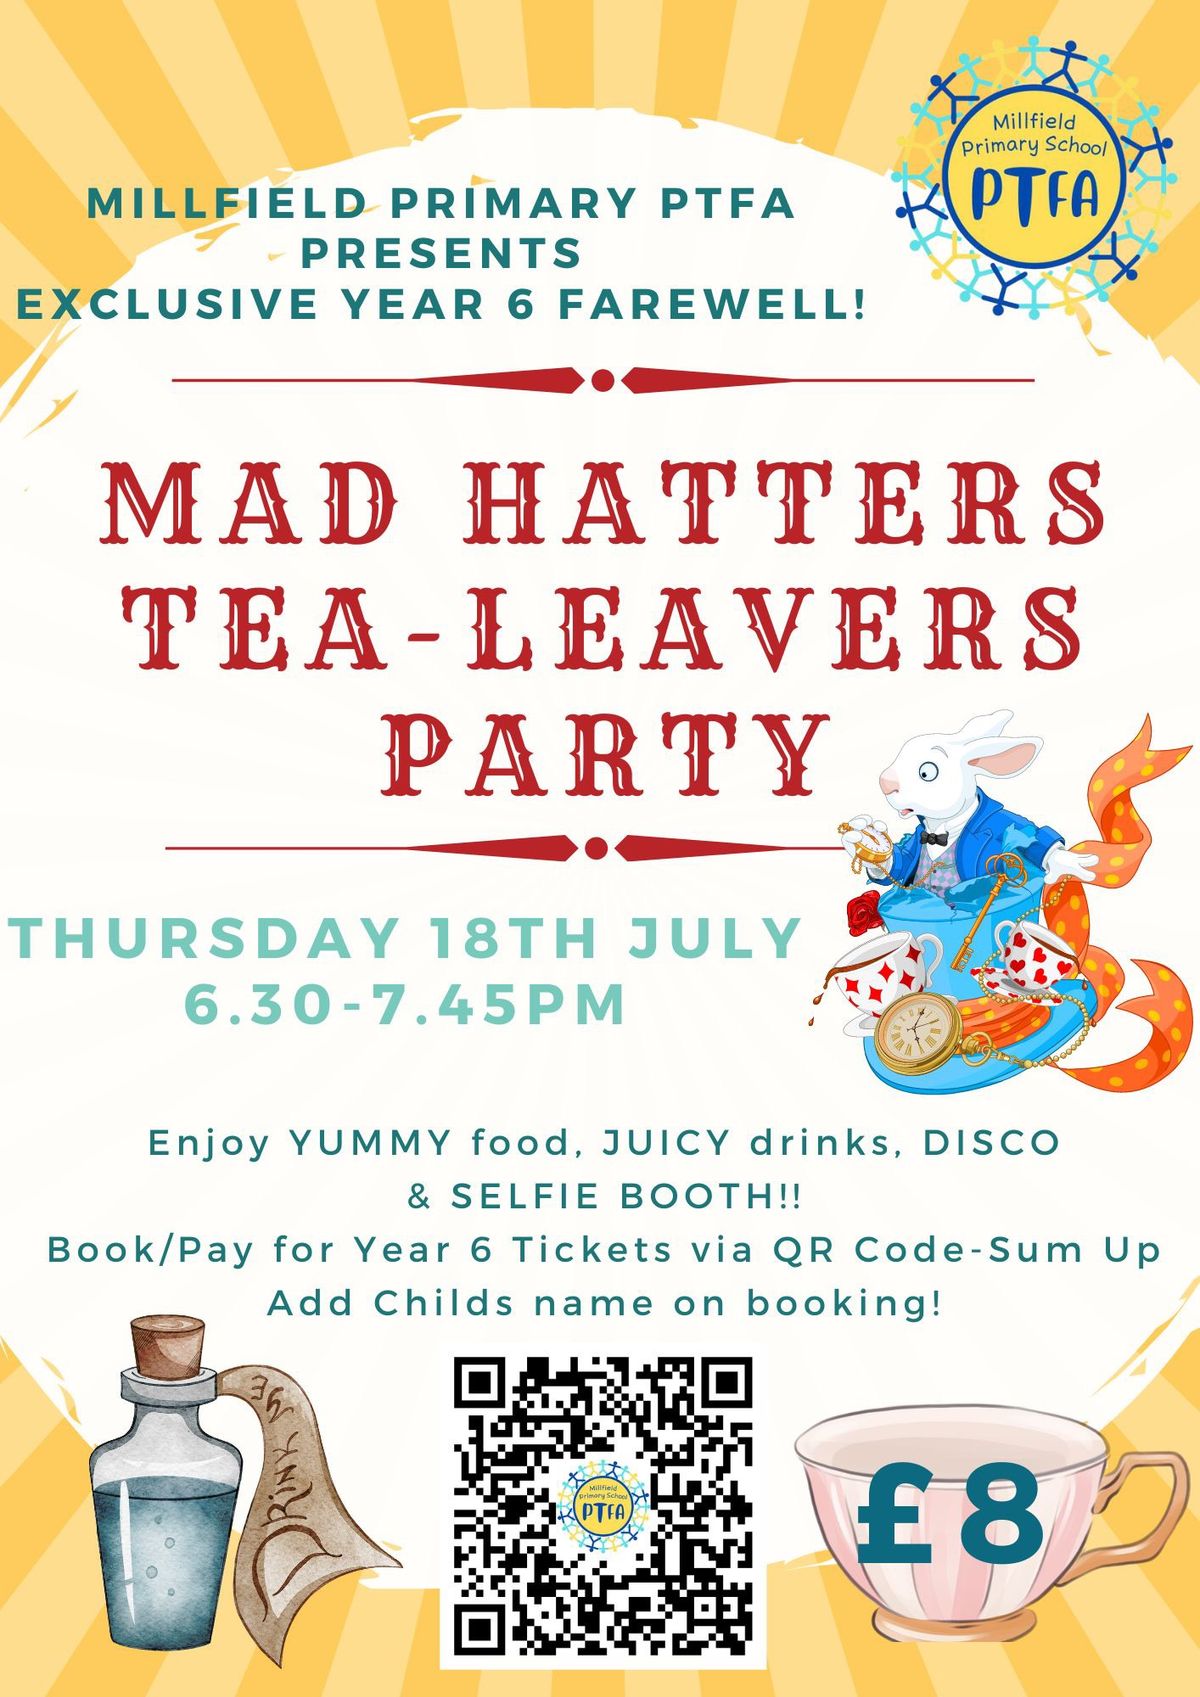 Mad Hatter Tea-Leavers Party